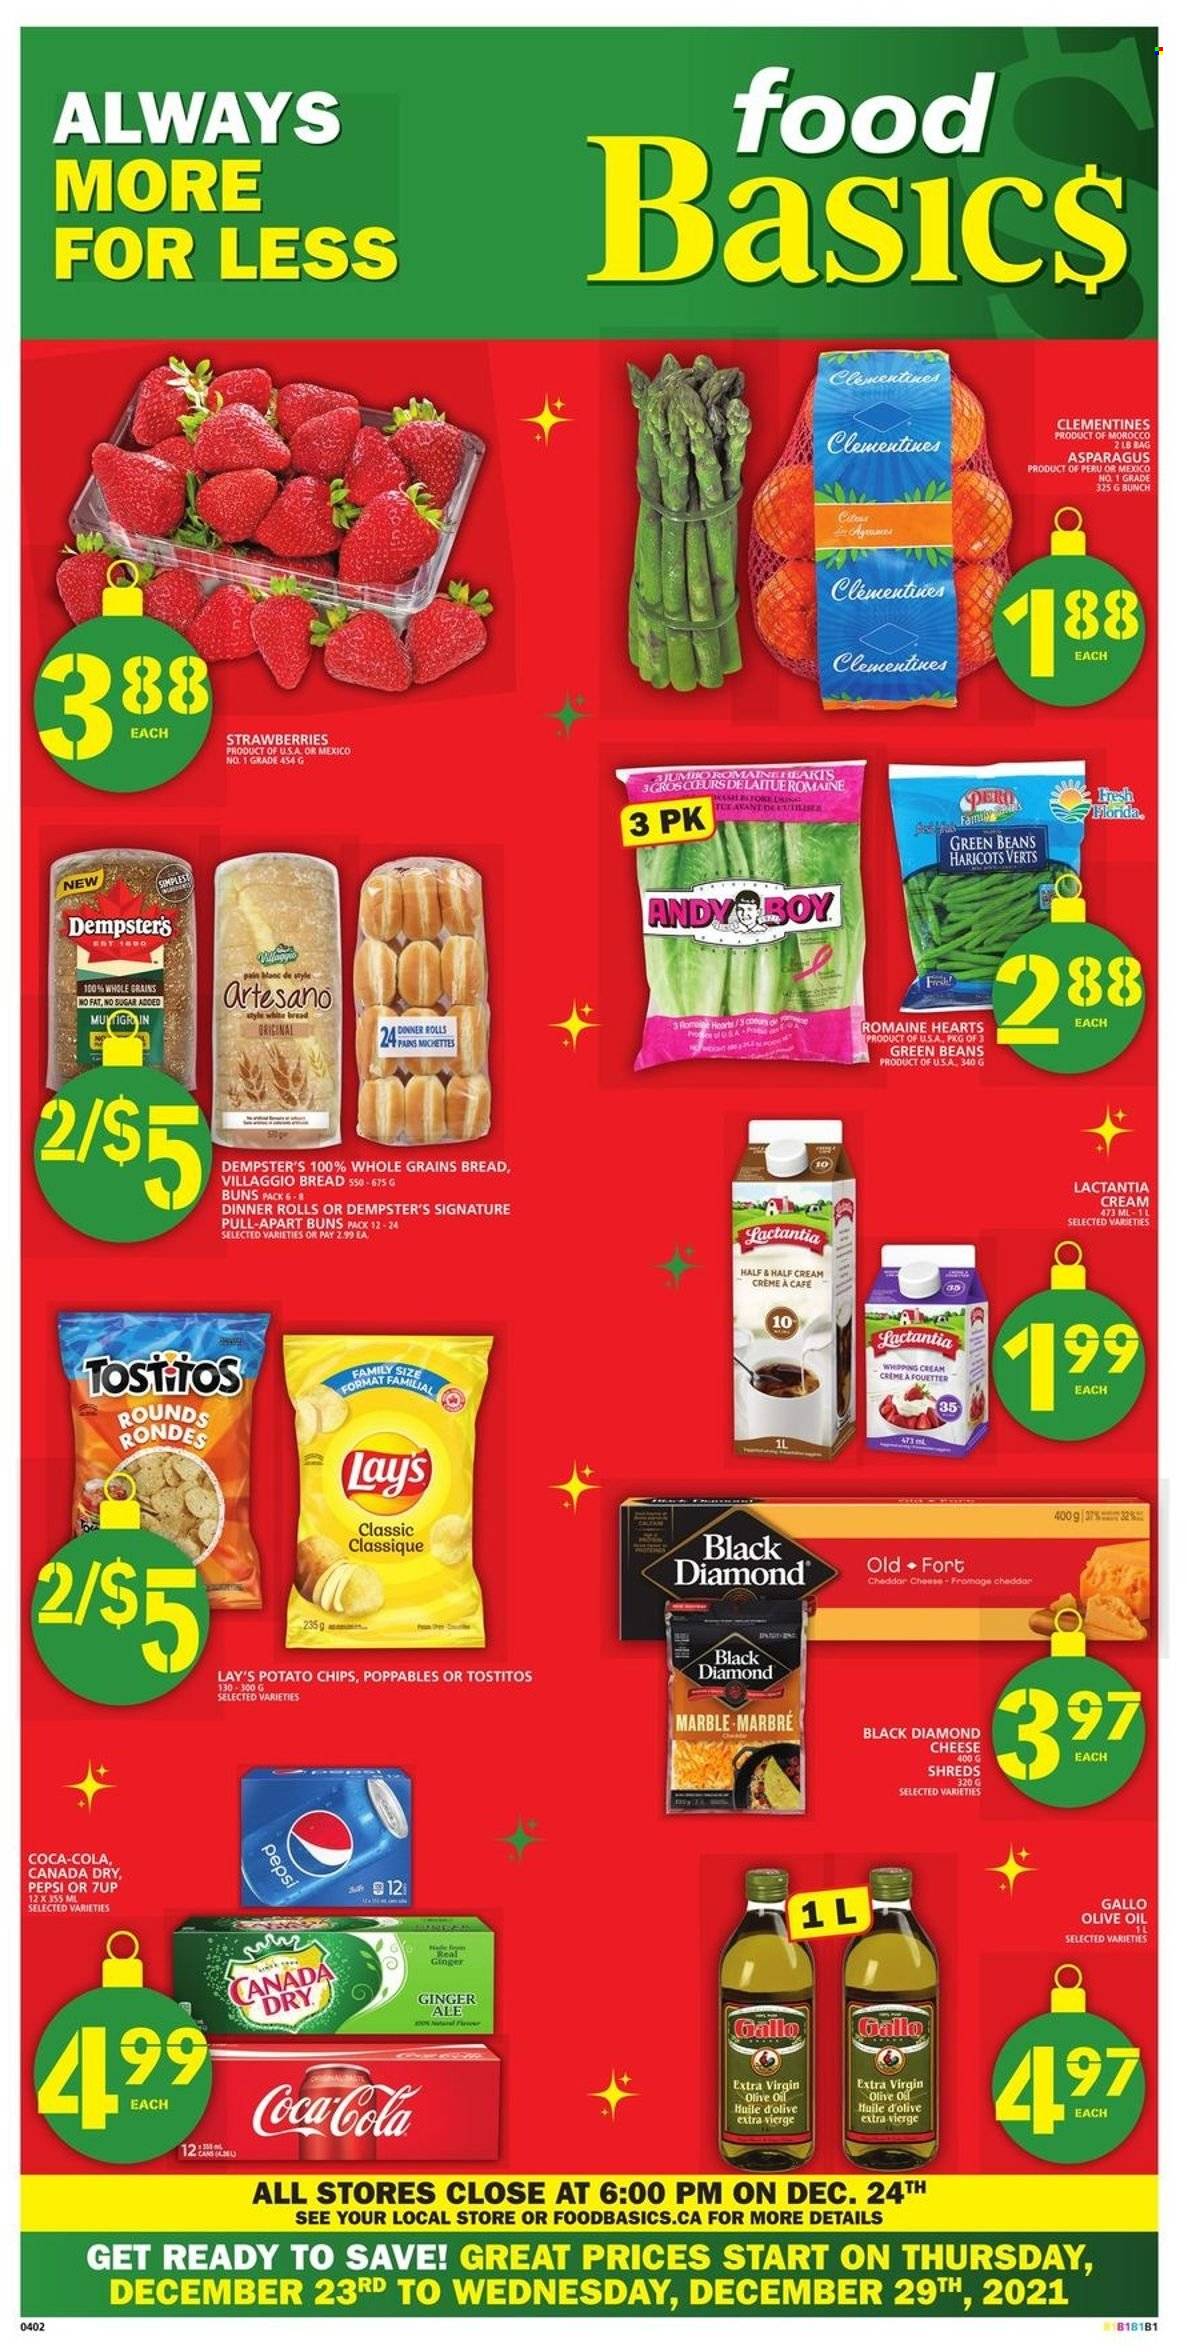 thumbnail - Food Basics Flyer - December 23, 2021 - December 29, 2021 - Sales products - dinner rolls, buns, asparagus, beans, green beans, clementines, strawberries, cheese, potato chips, Lay’s, Tostitos, extra virgin olive oil, olive oil, oil, Canada Dry, Coca-Cola, ginger ale, Pepsi, 7UP, Half and half, chips. Page 1.